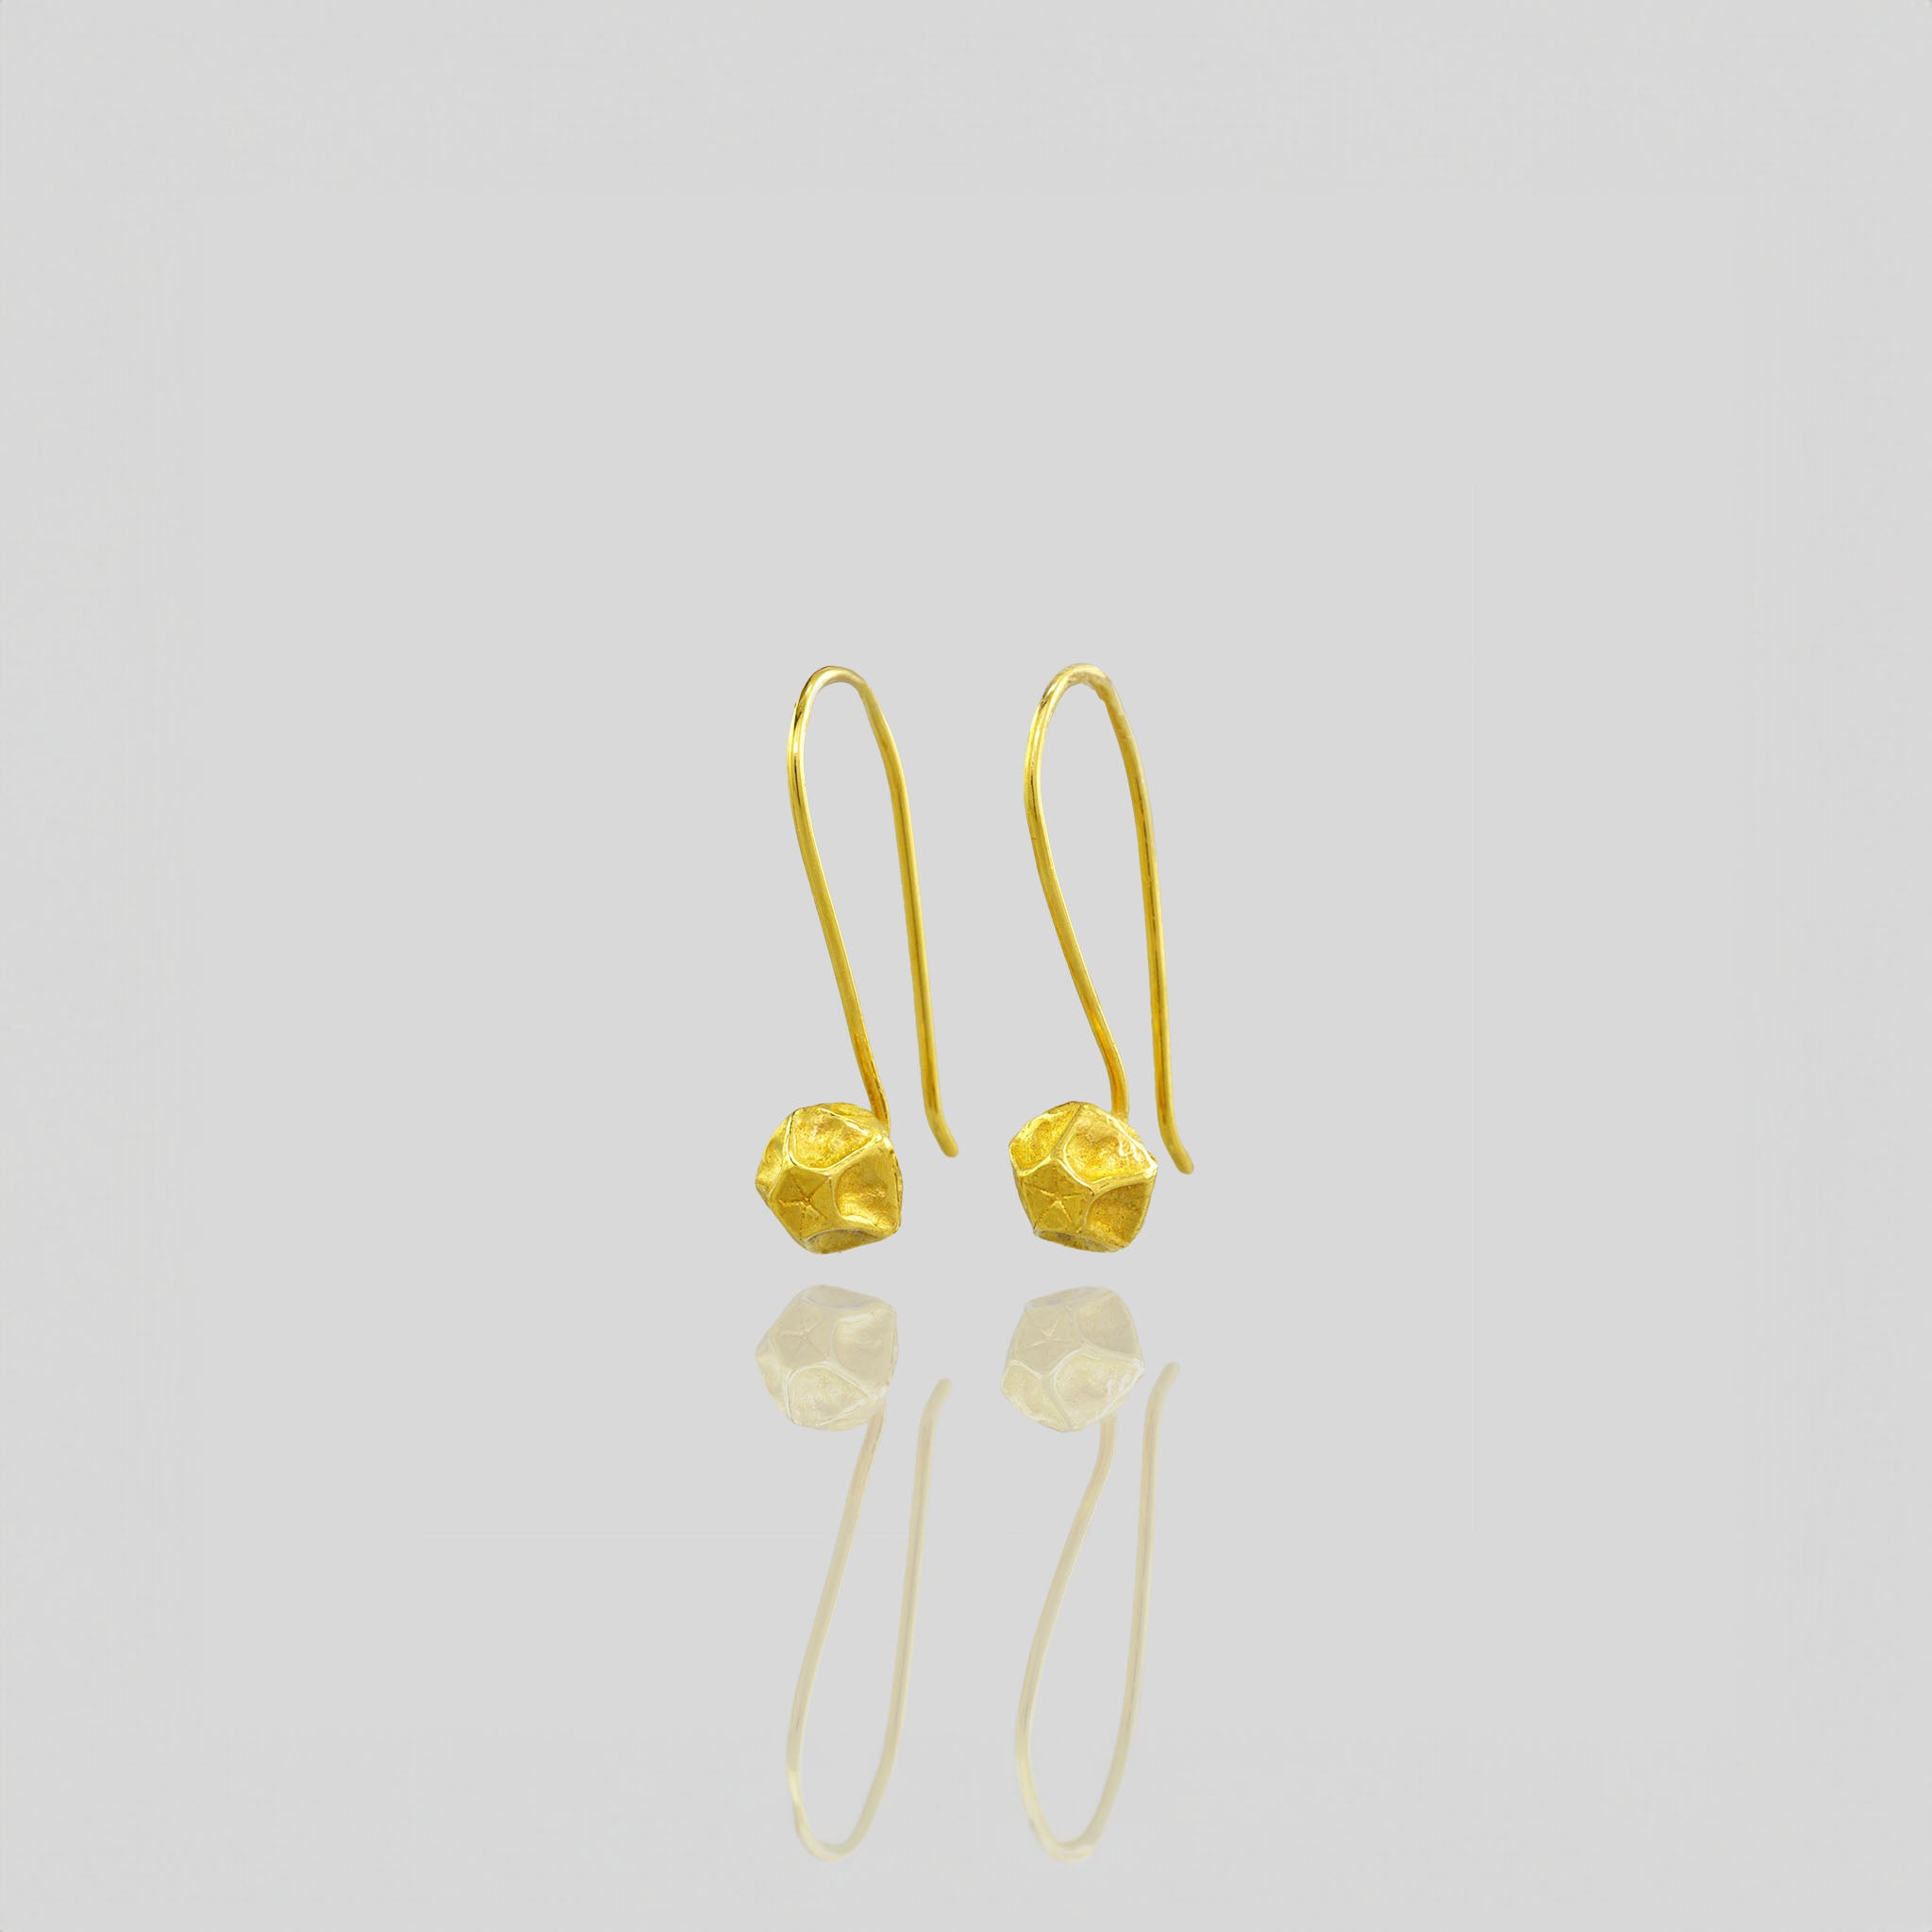 Handcrafted Gold Pentagon Earrings with Intricate Lines.